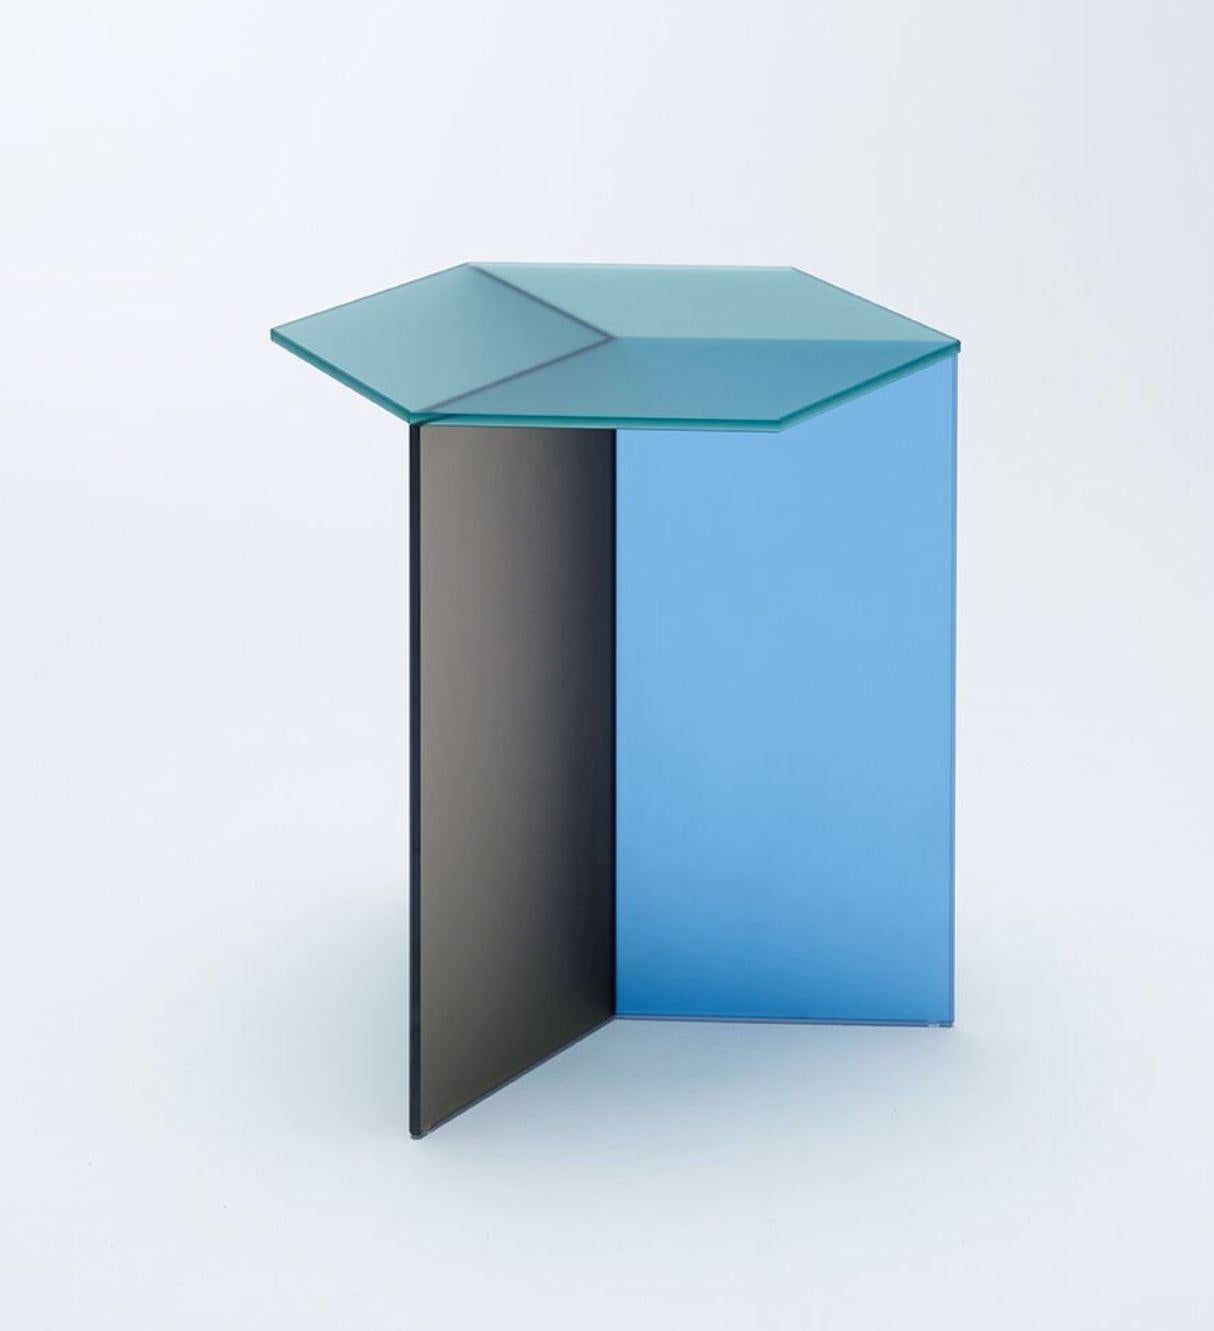 Satin Glass 'Isom Tall' Coffee Table, Sebastian Scherer In New Condition For Sale In Geneve, CH